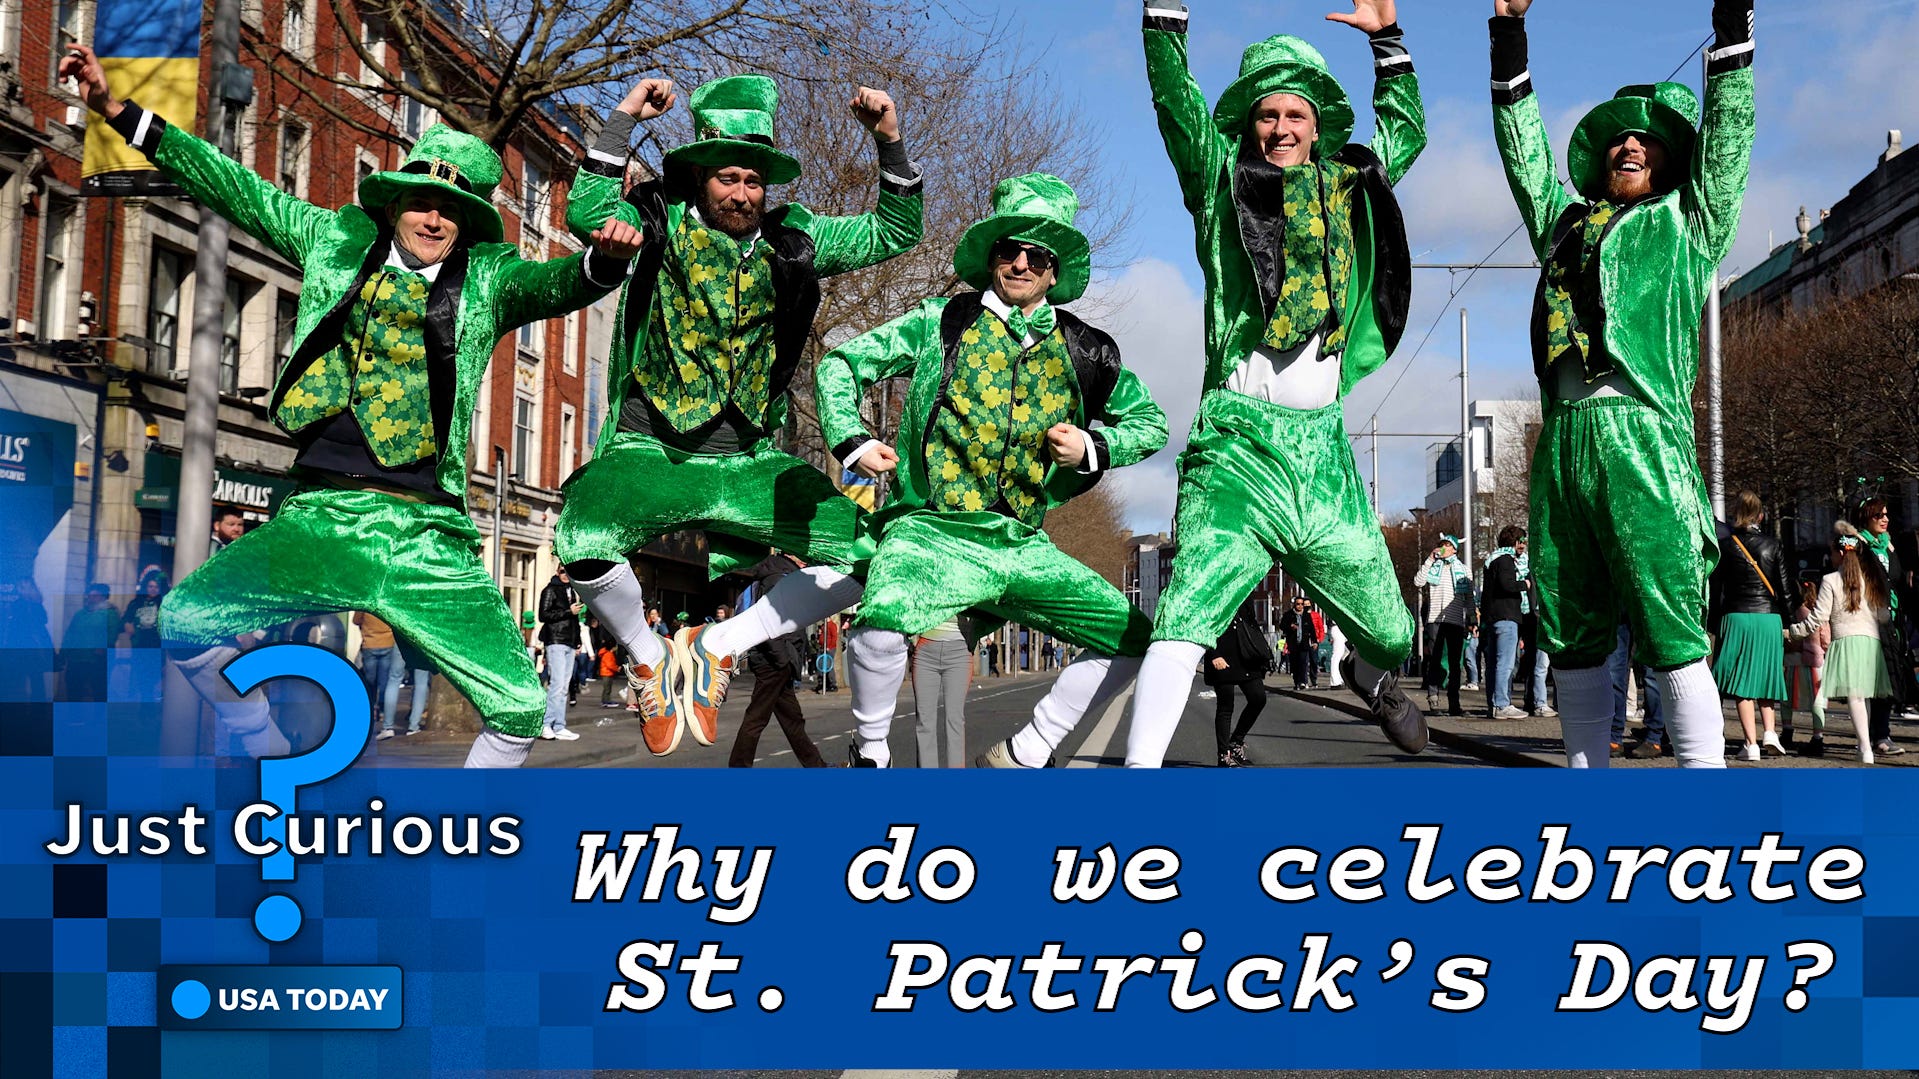 When is St. Patrick's Day? Get to know the history of the Irish celebration in the US